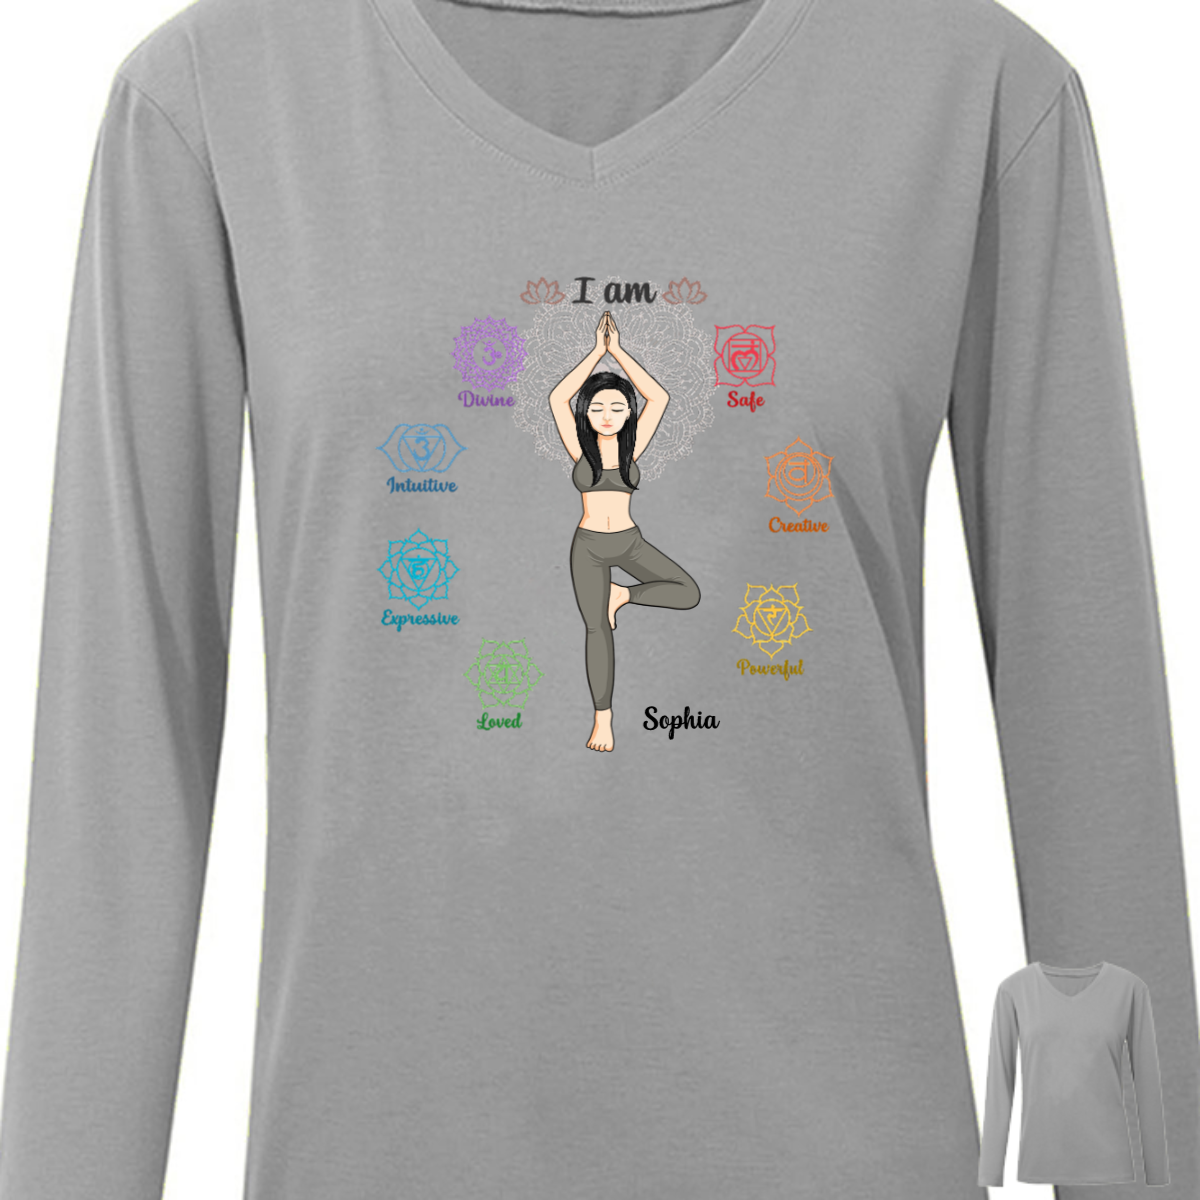 I Am Divine Intuitive Expressive Loved - Gift For Yoga Lovers - Personalized Custom Long Sleeve Shirt